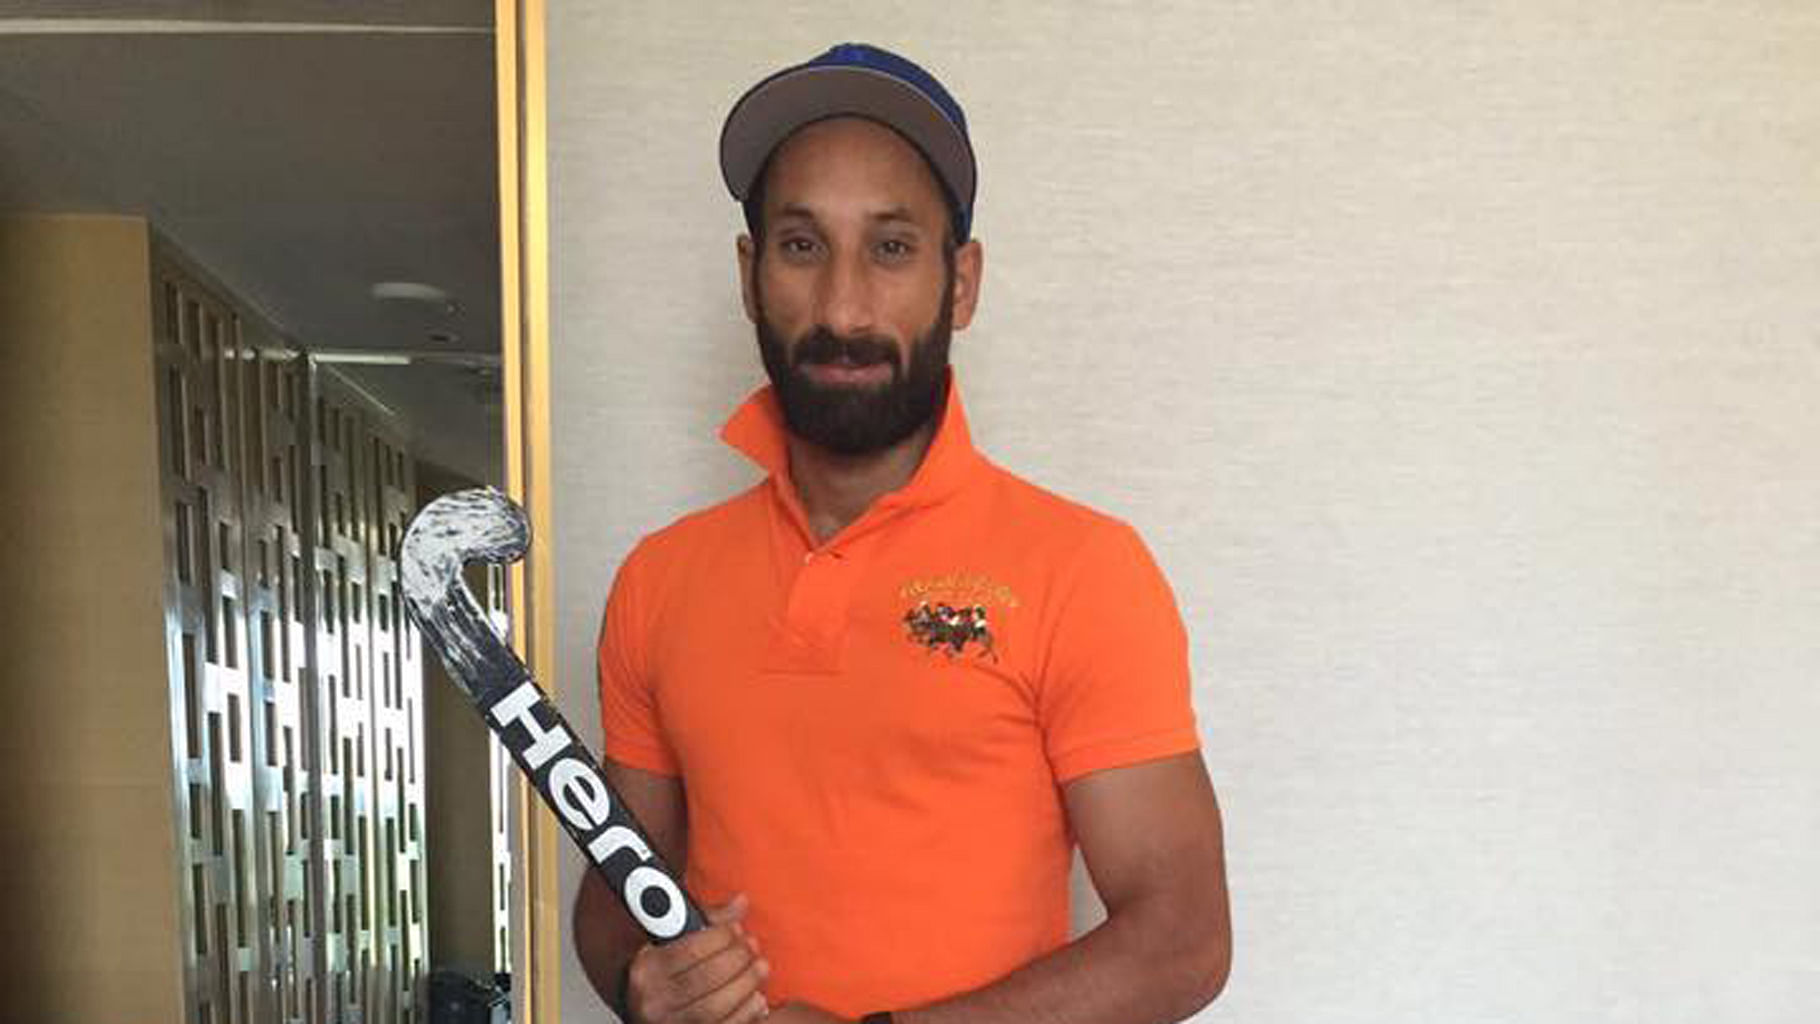 Sardar Singh spoke to the media on Thursday to clarify his stand following allegations of sexual harassment by a British 21-year-old. (Photo: Facebook/<a href="https://www.facebook.com/SardarSinghHockey/?fref=ts">Sardar Singh</a>)